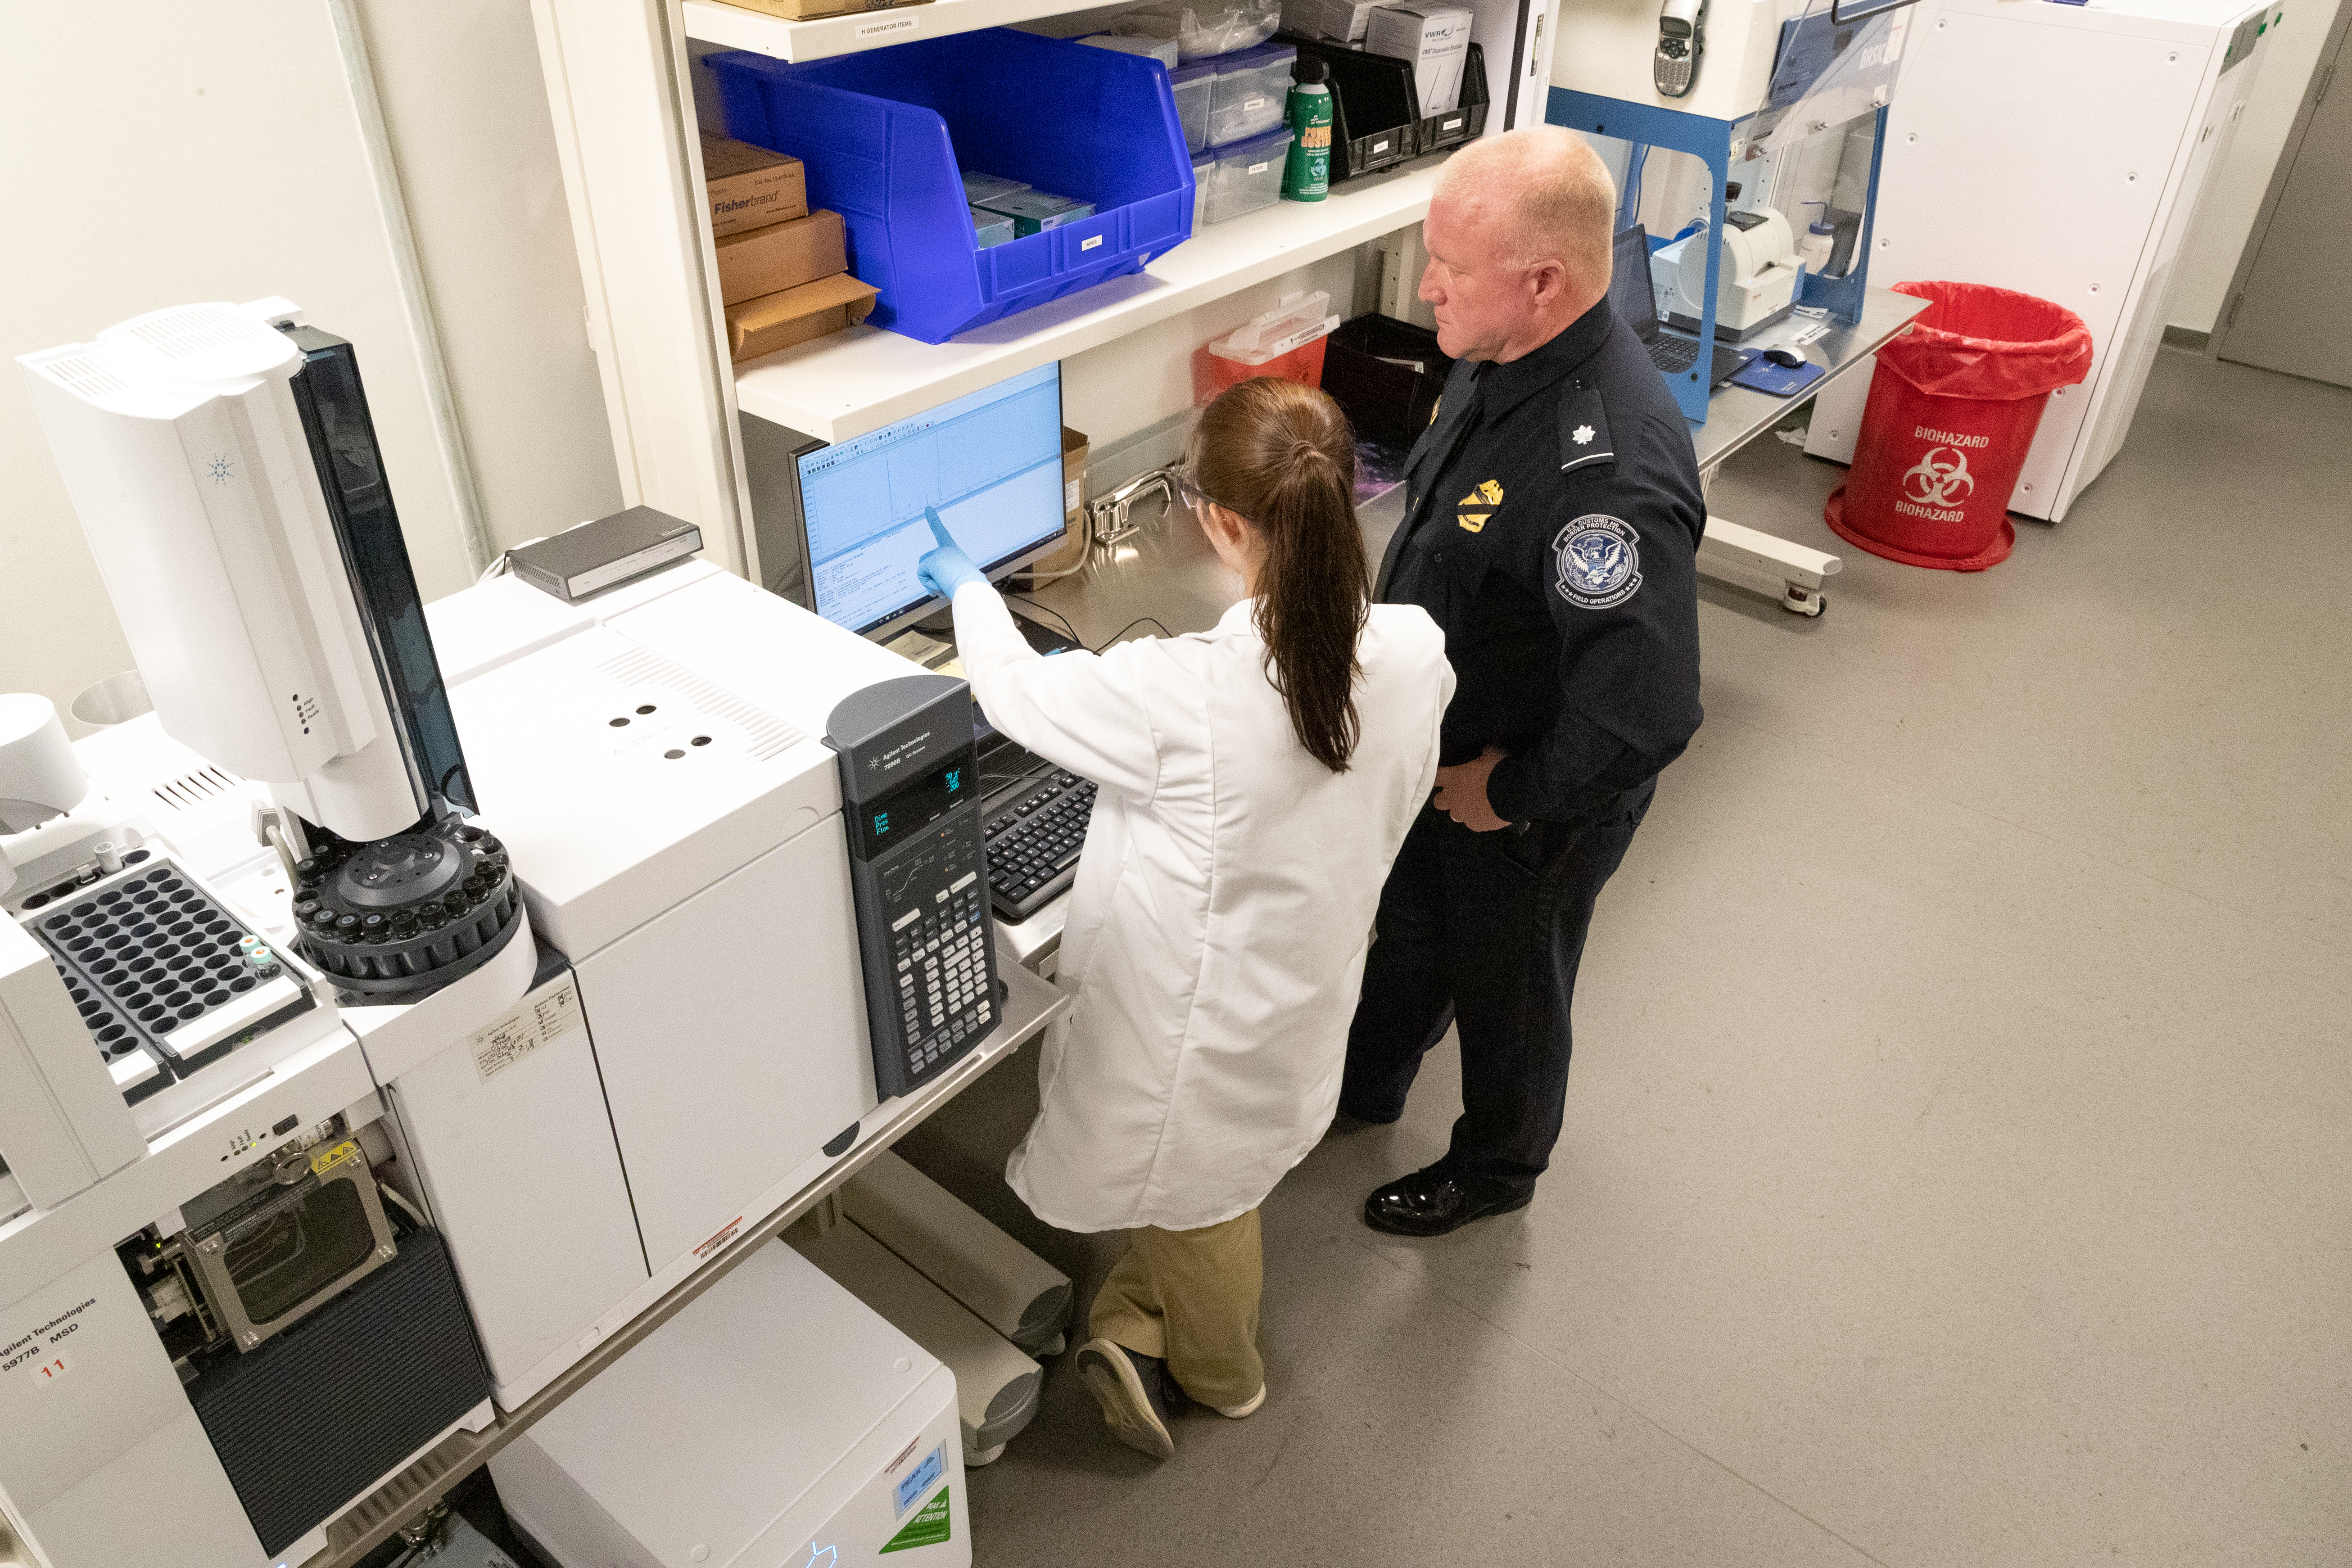 CBP scientist and CBP officer work in a lab